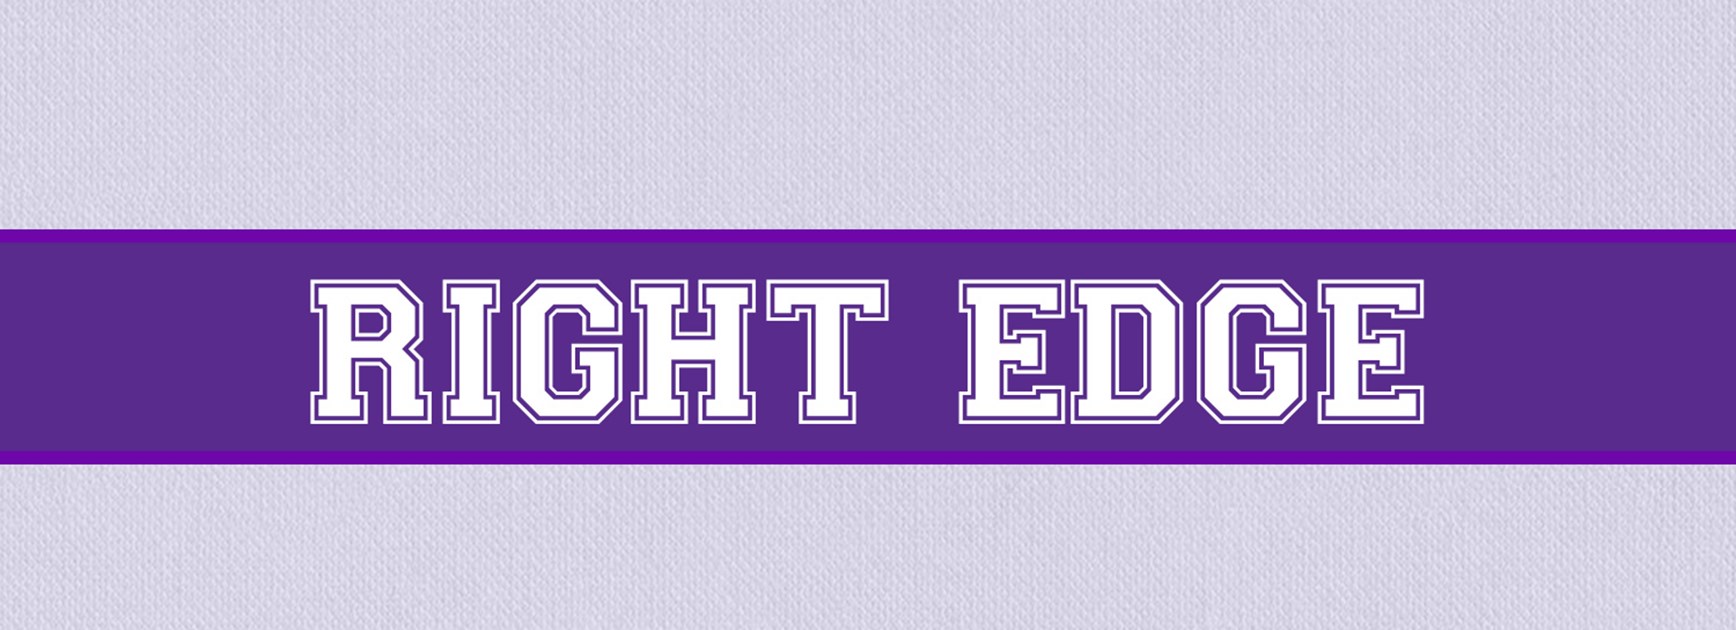 Yearbook 2021: Right edge